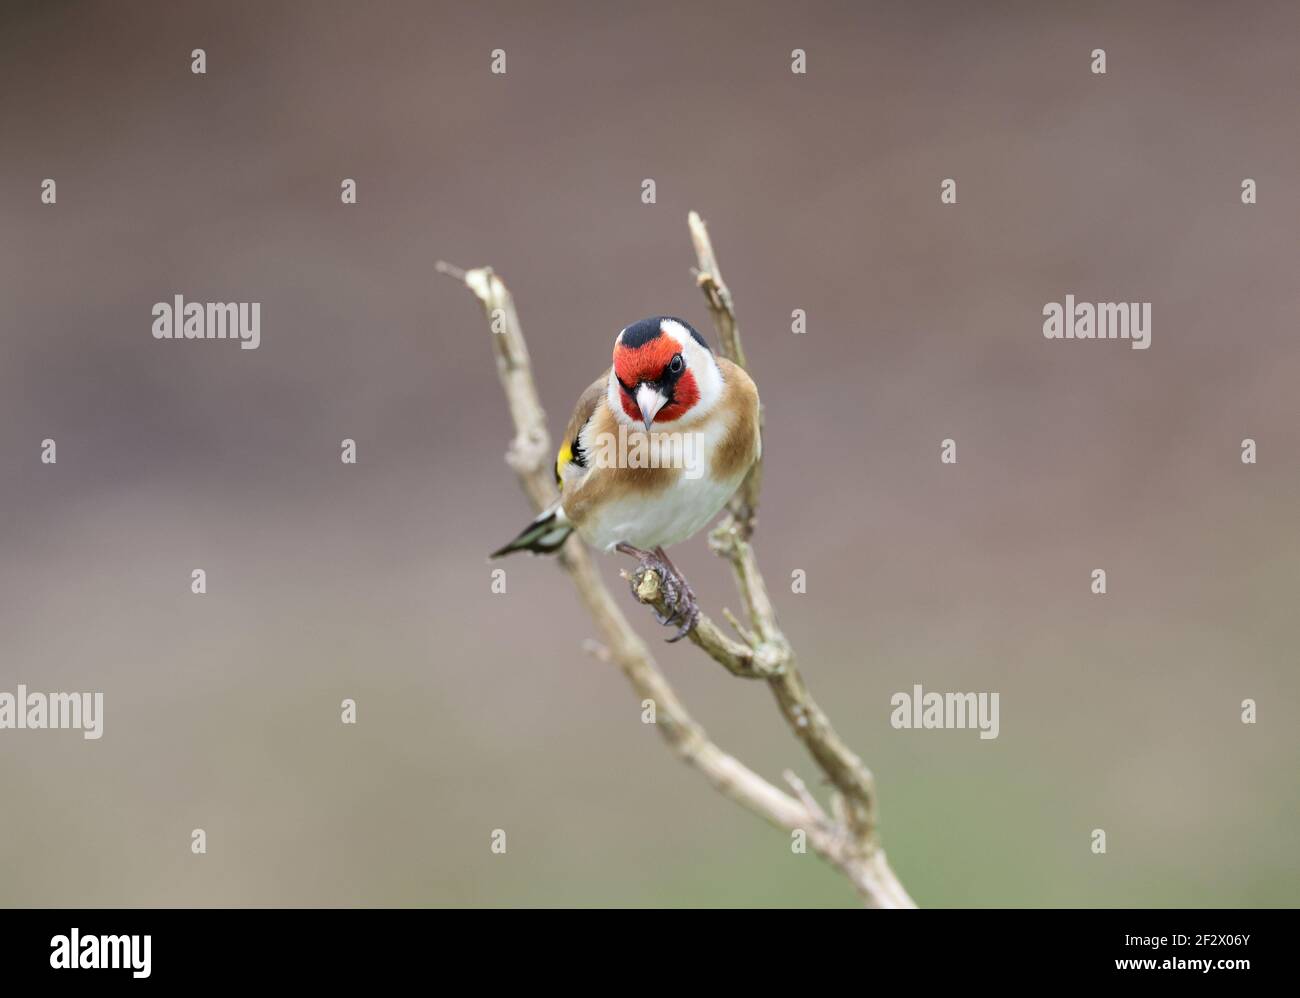 European Goldfinch, Carduelis carduelis, perched on a branch in winter. Stock Photo